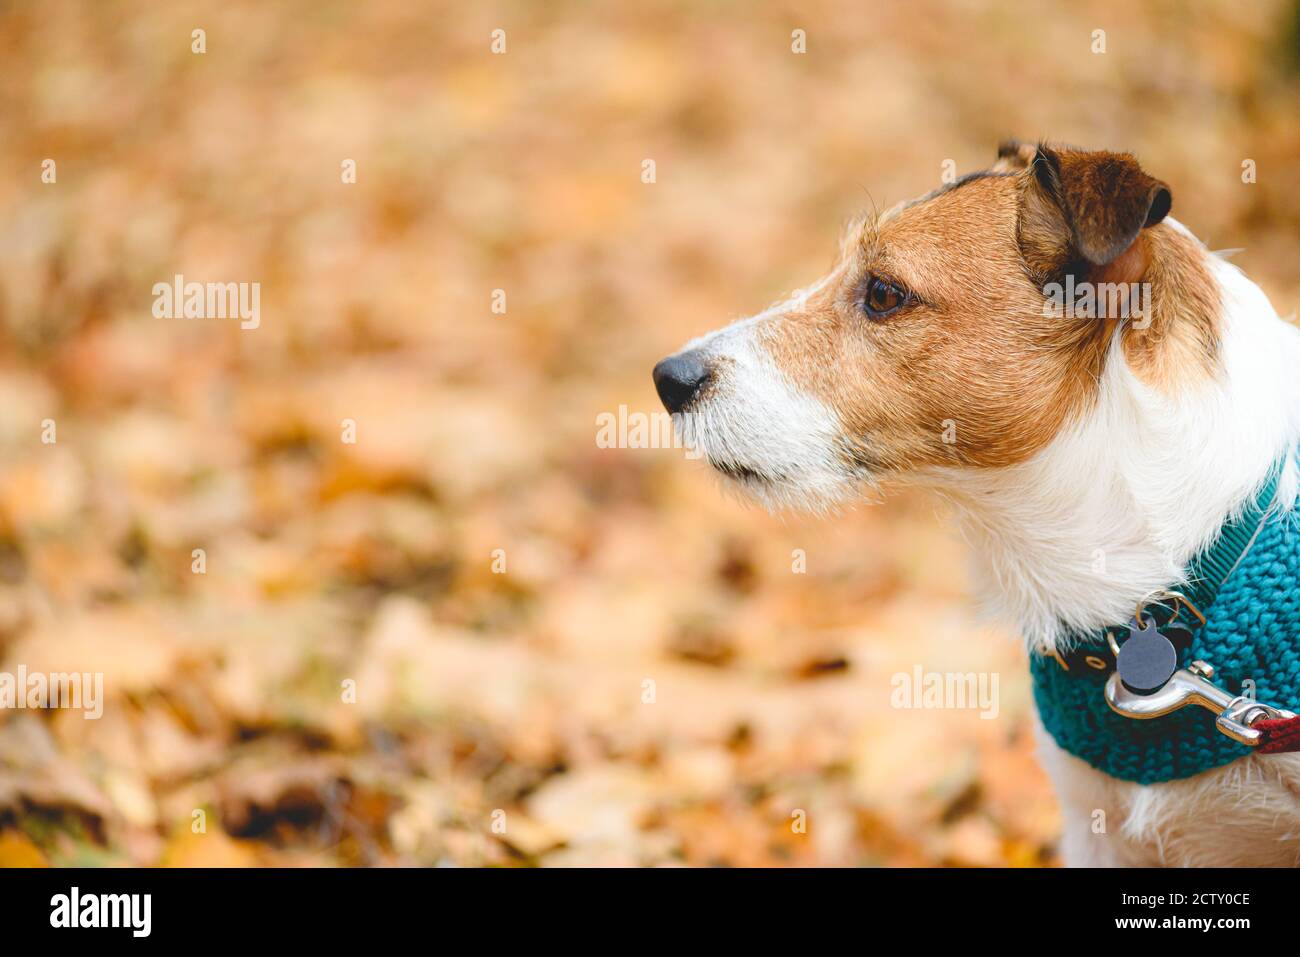 Small dog walking on leash on late autumn or early winter day against brown background with copy space Stock Photo